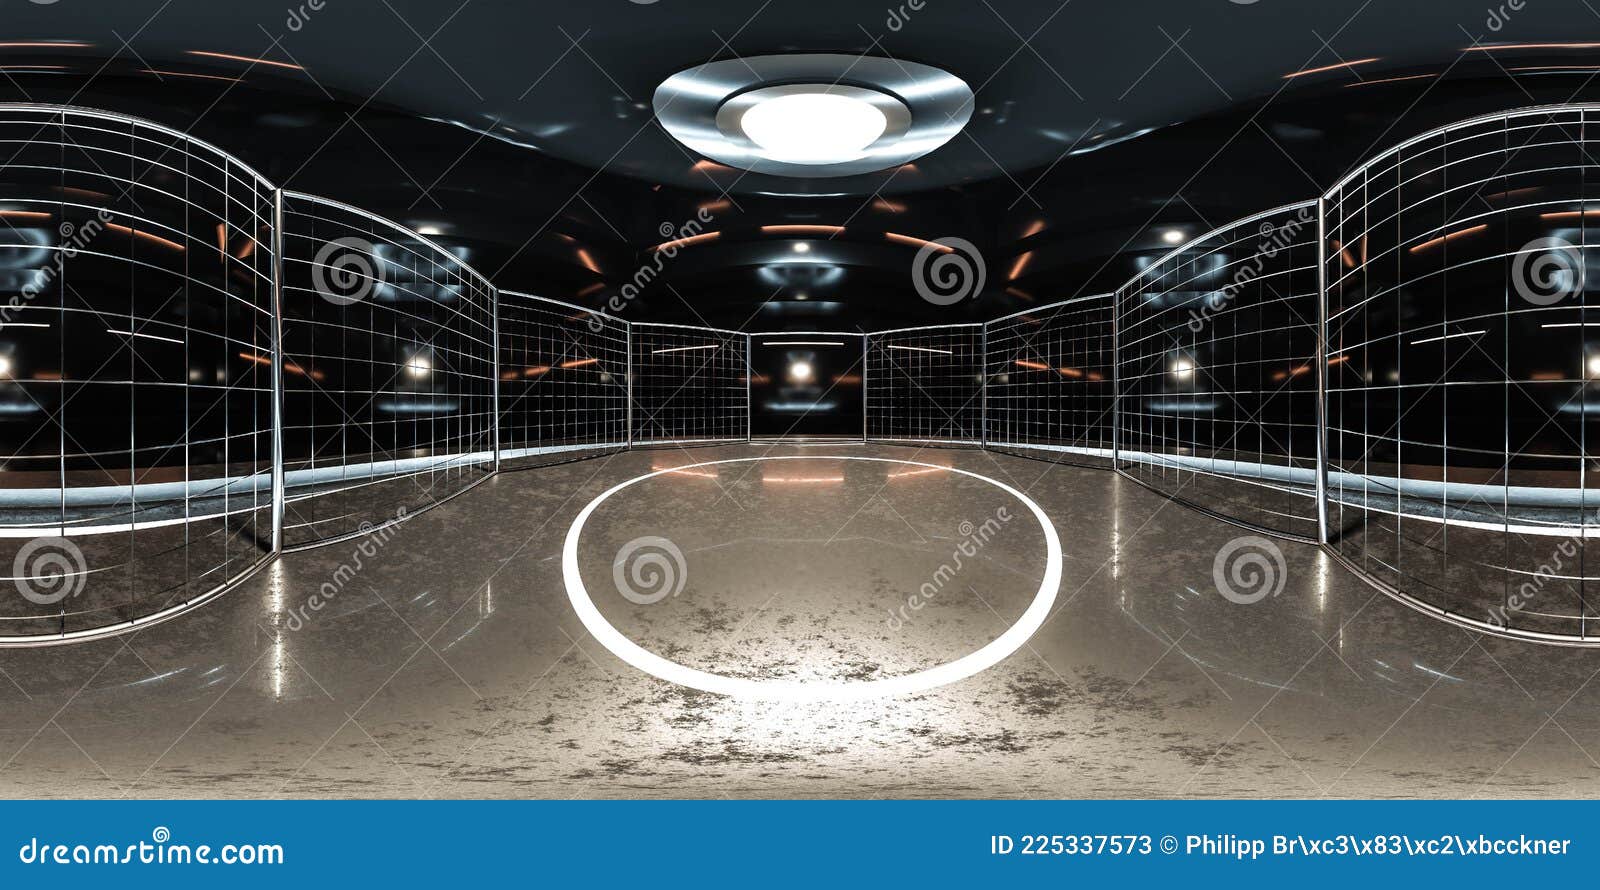 Full 360 Degree Panorama Virtual Environment Map of Mma Cage in Industrial Hall 3d Render Illustration Hdri Hdr Vr Style Stock Illustration